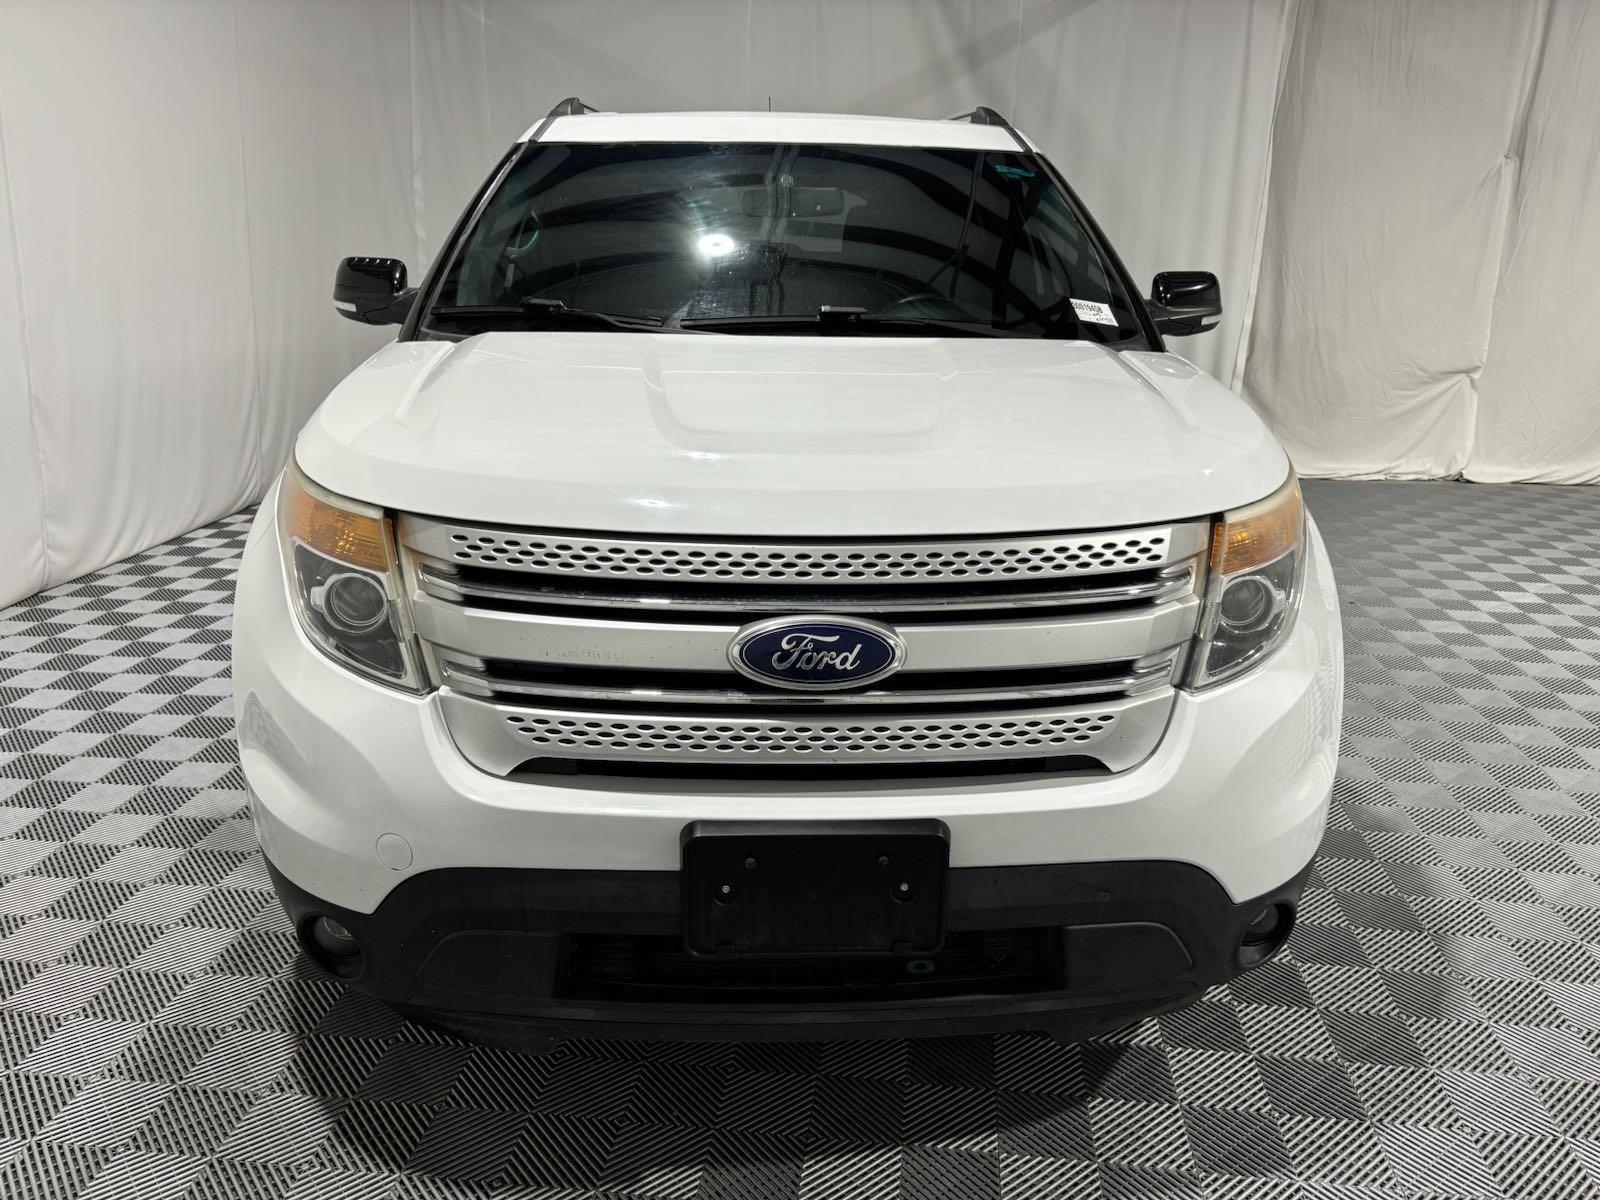 Used 2015 Ford Explorer XLT Sport Utility for sale in St Joseph MO